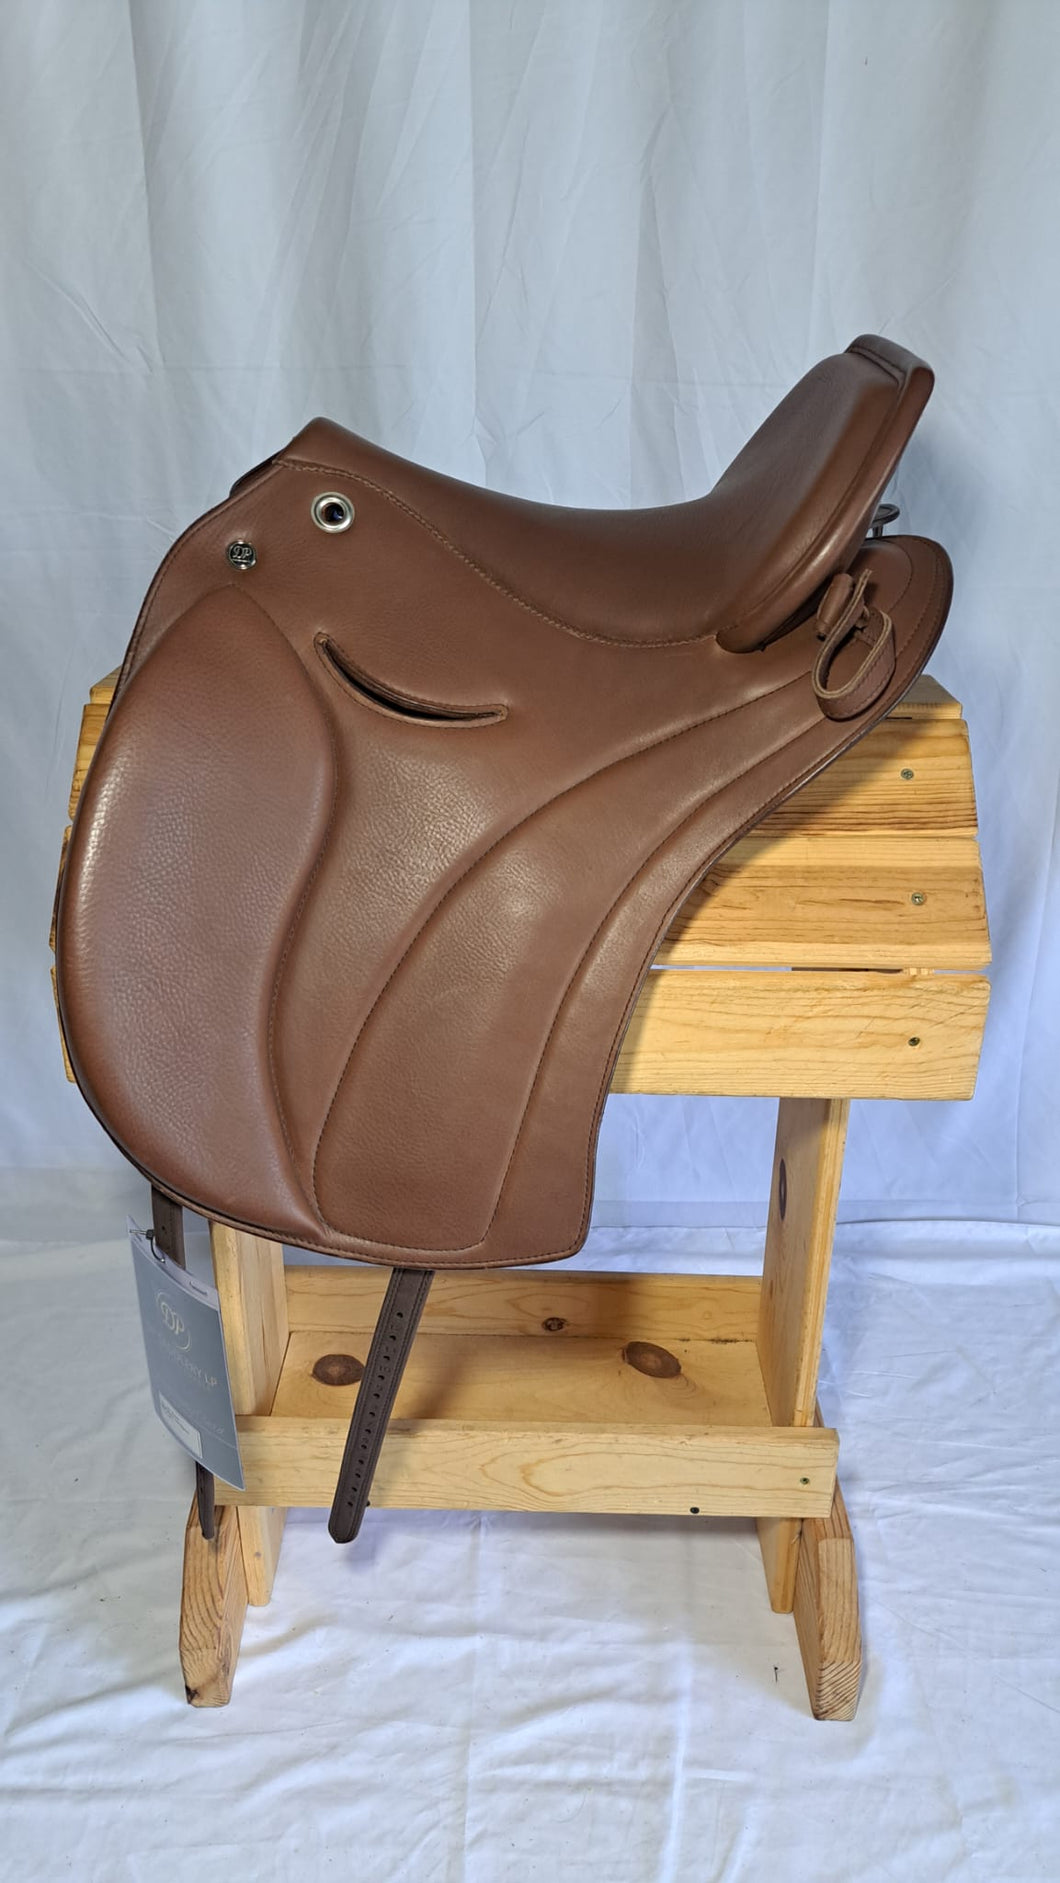 DP Saddlery Majestro 6940, side view on a wooden saddle rack, white background